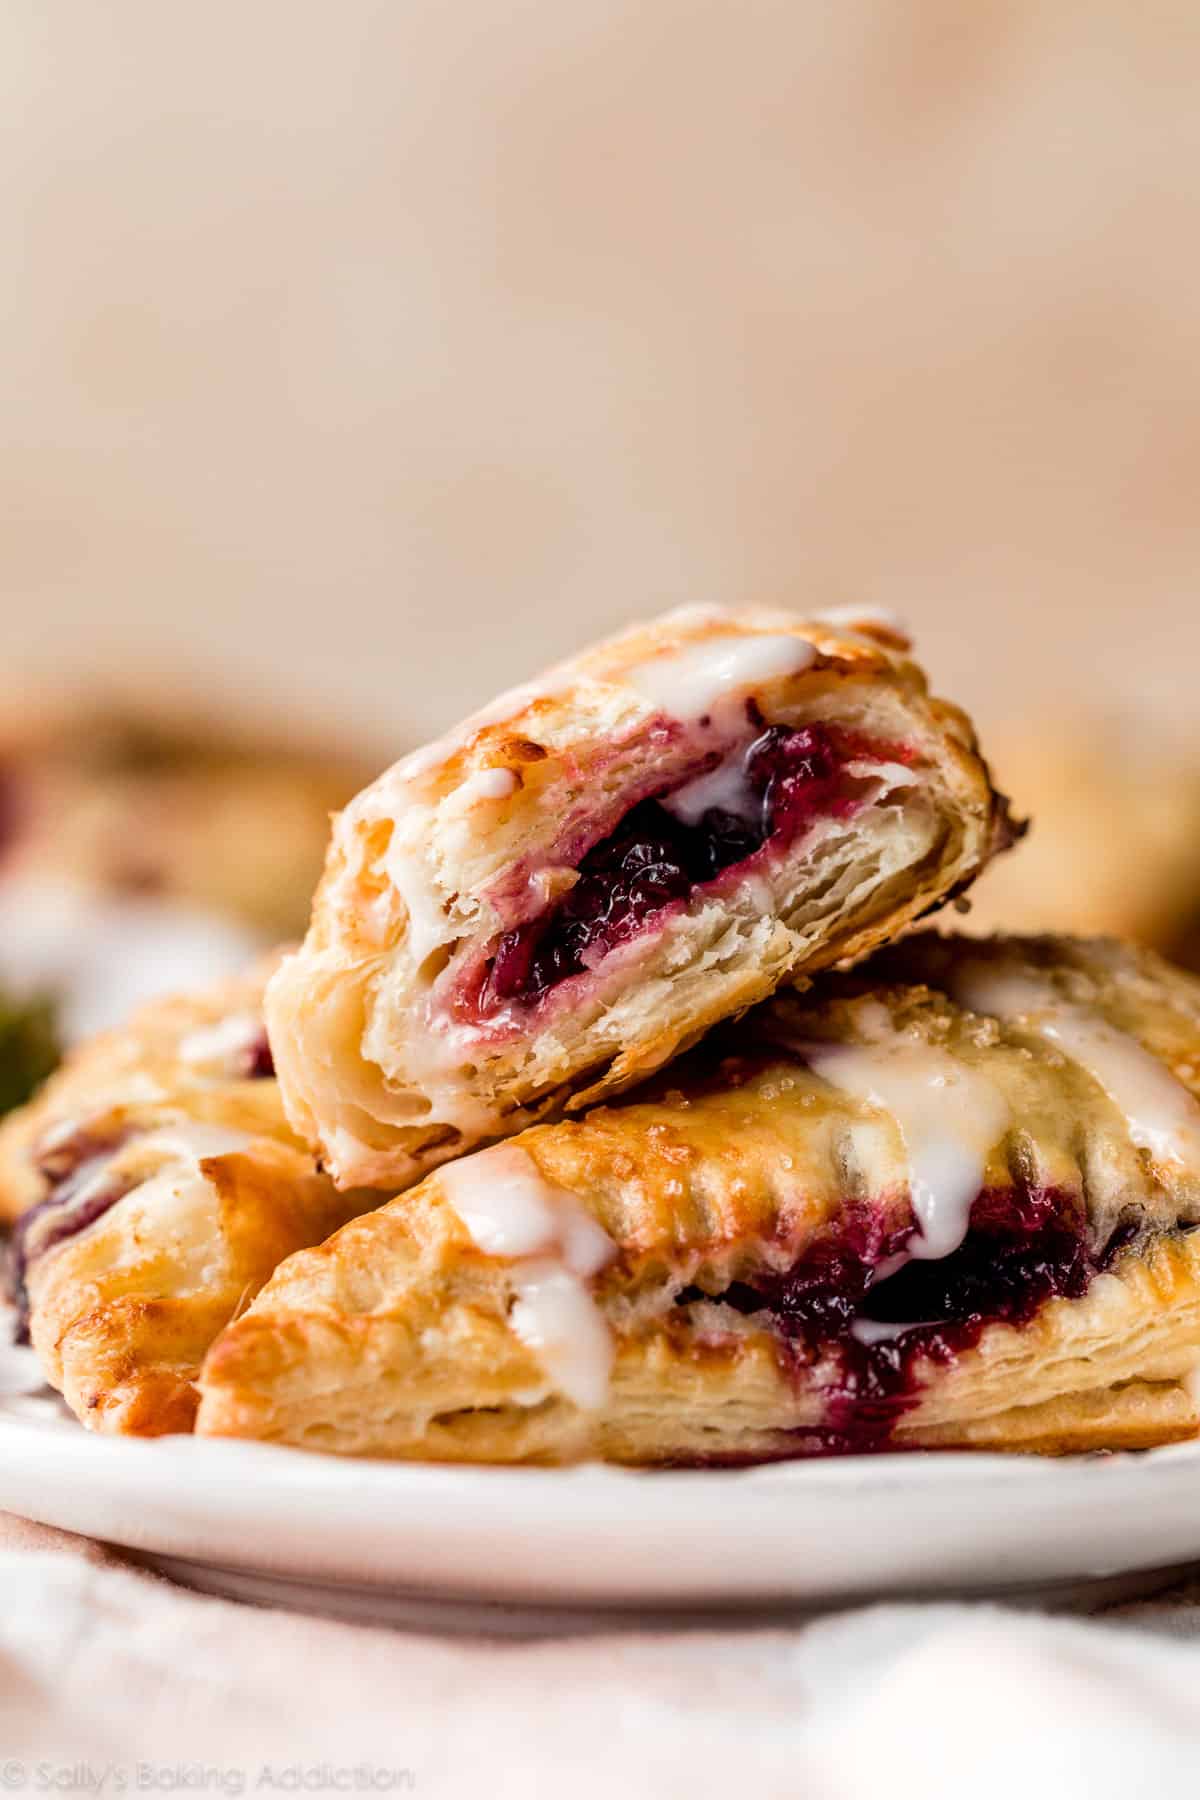 inside of a baked berry turnover showing layers of puff pastry dough